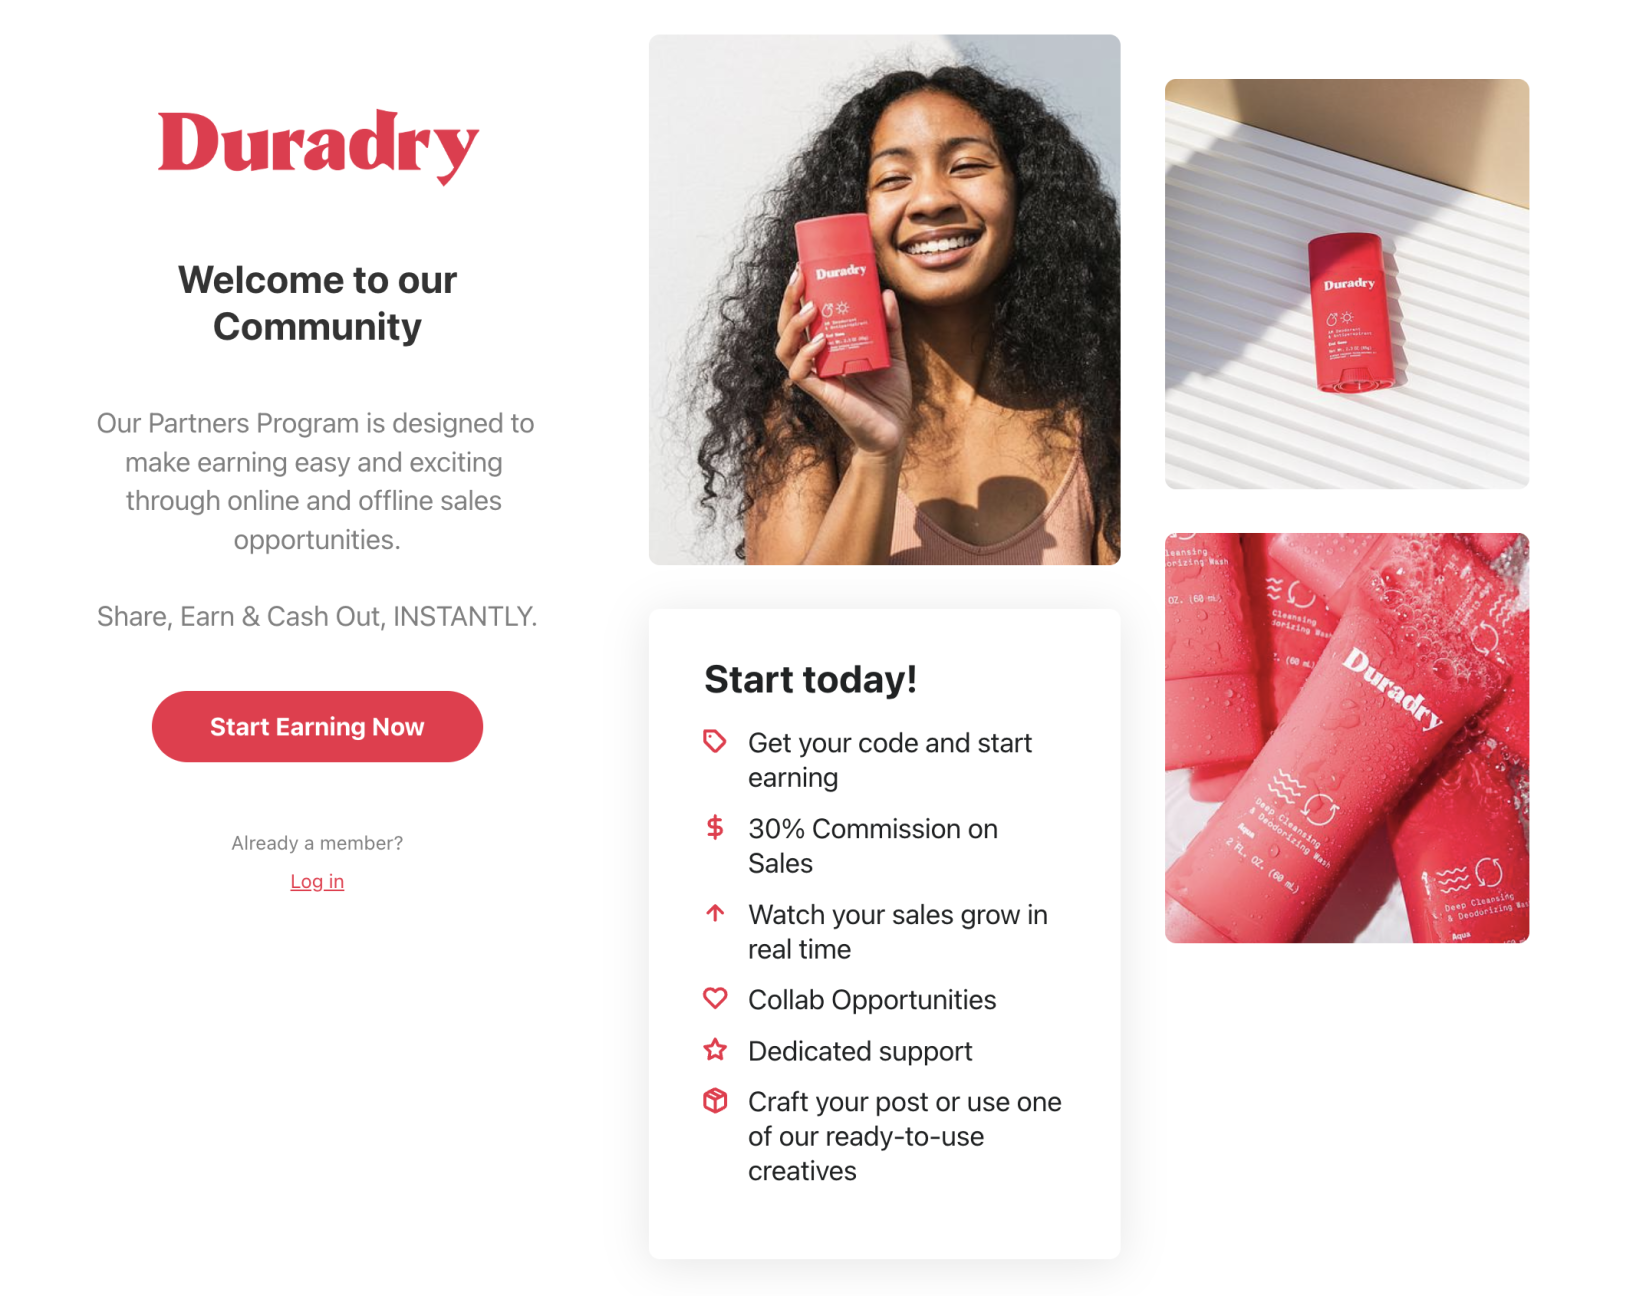 Landing page for Duradry’s Partner Program shows how creators can earn 30% commission on sales.